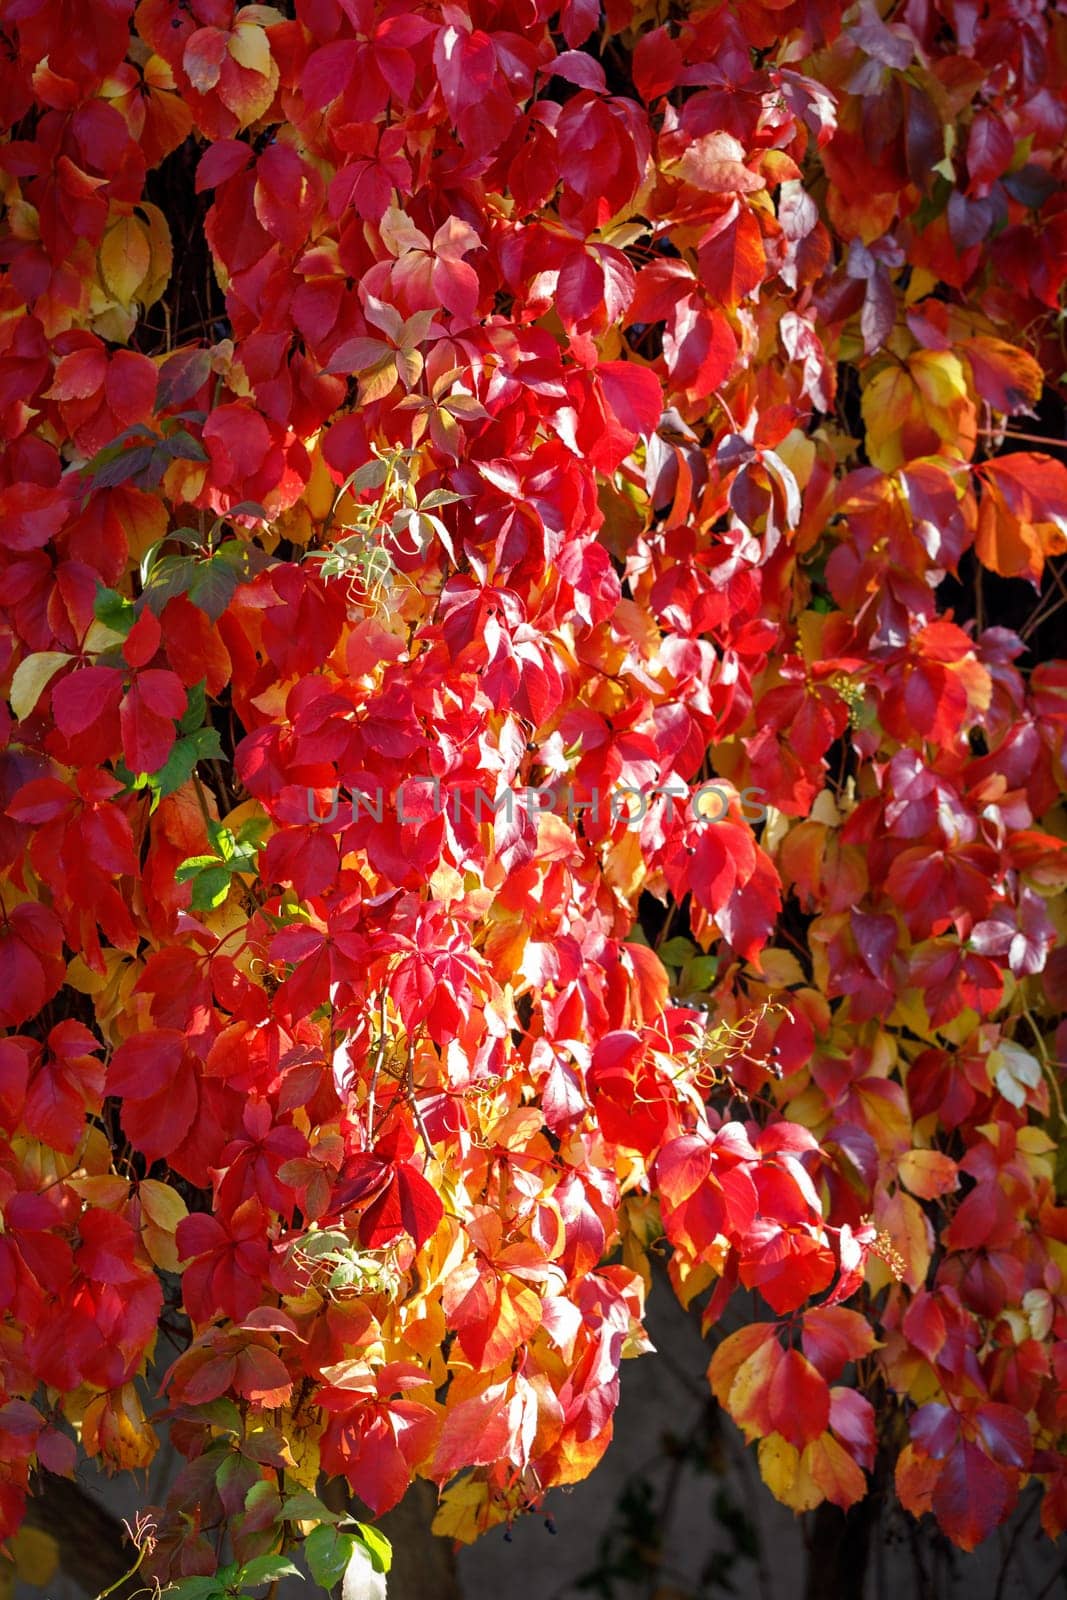 Shining in sunlight leaves of Parthenocissus quinquefolia in red, green, yellow and purple.